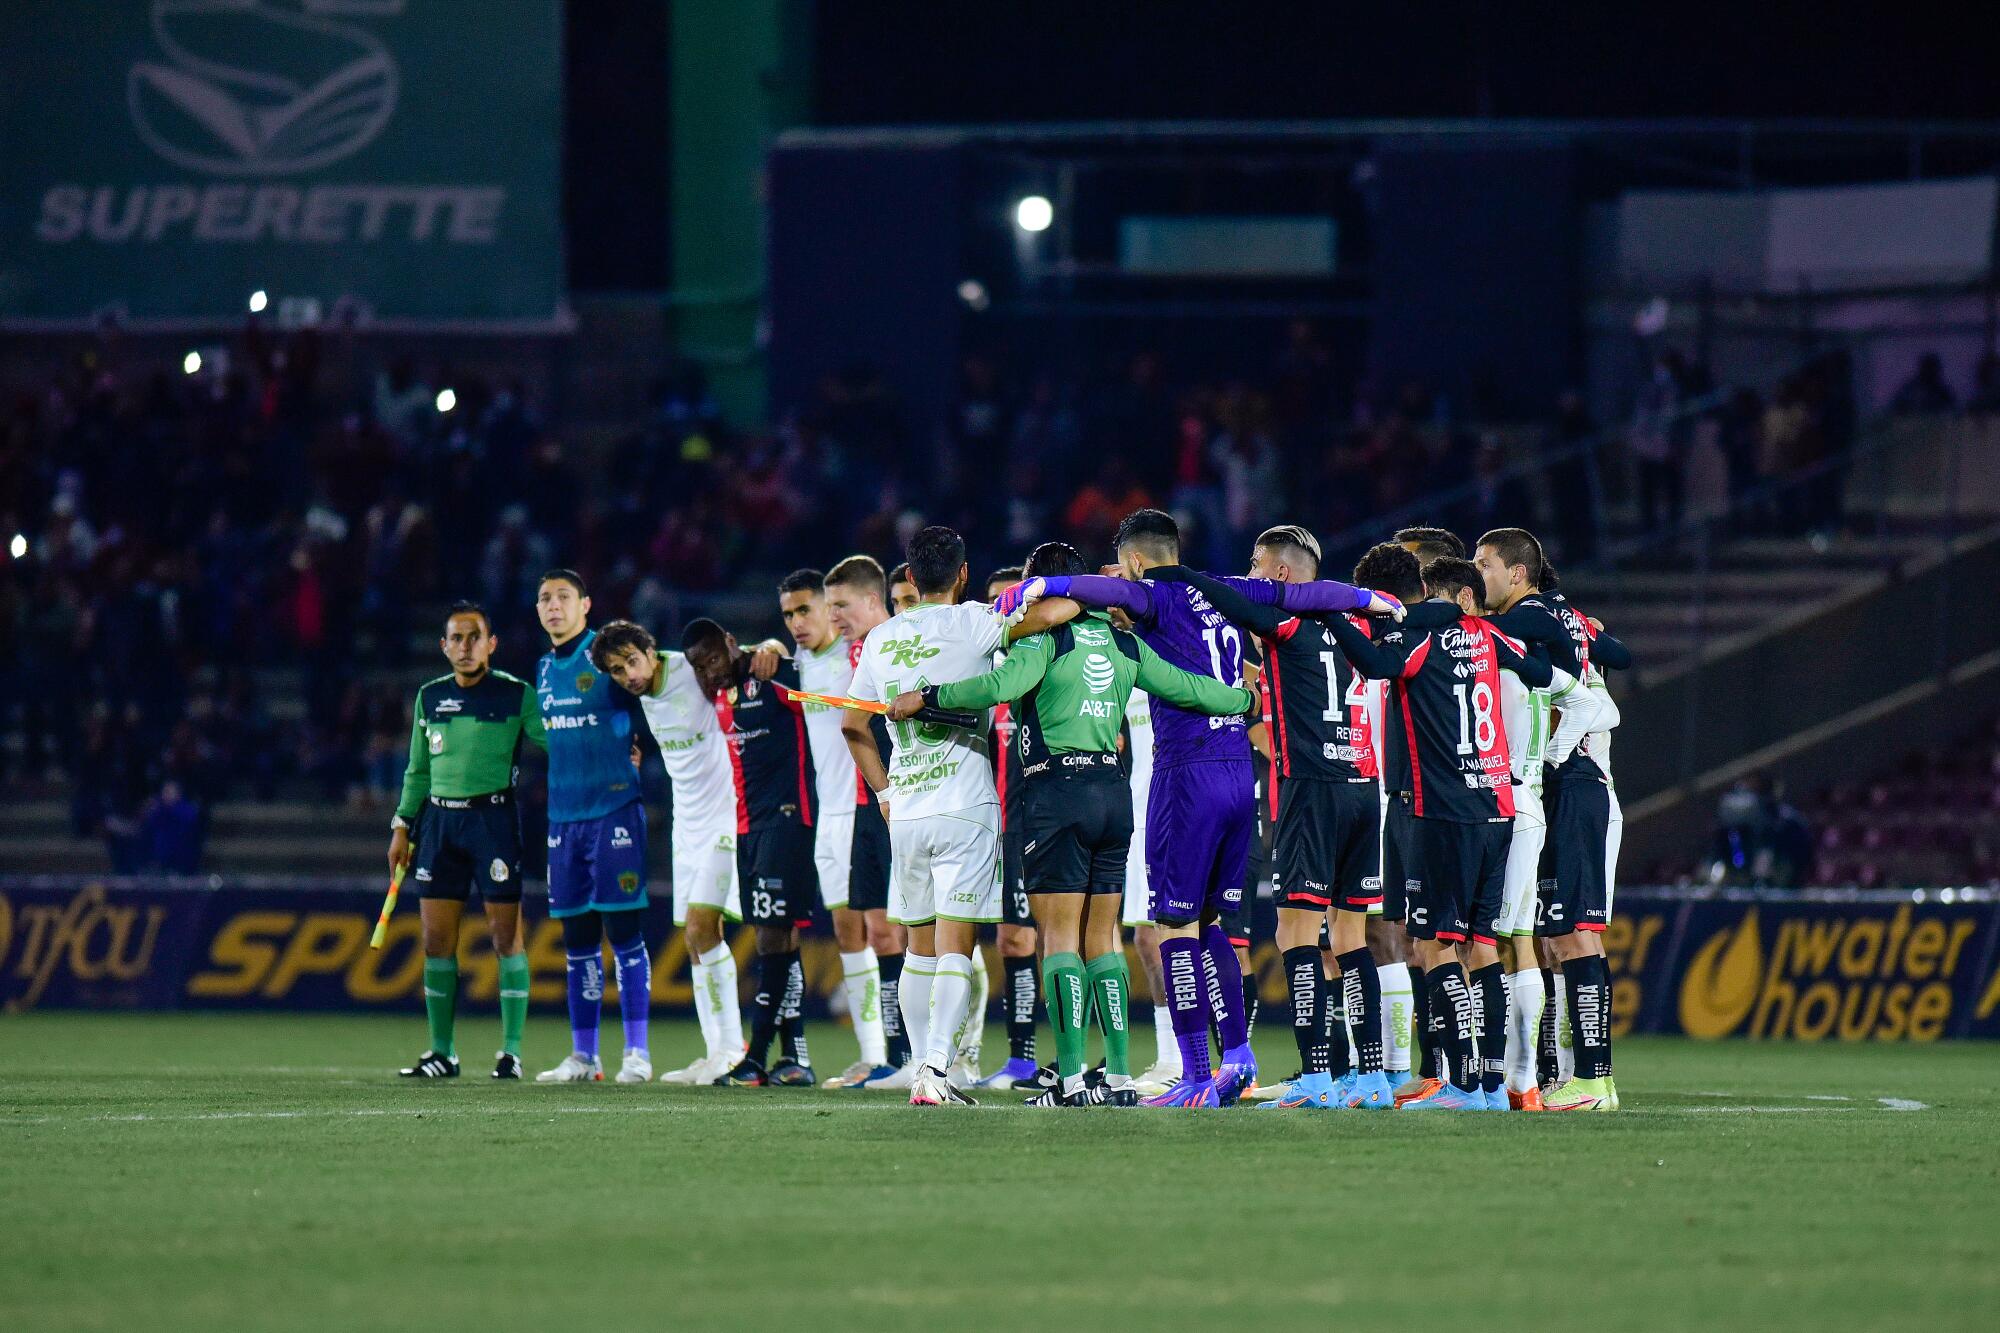 Players of Juarez and Atlas huddle to promote peace.